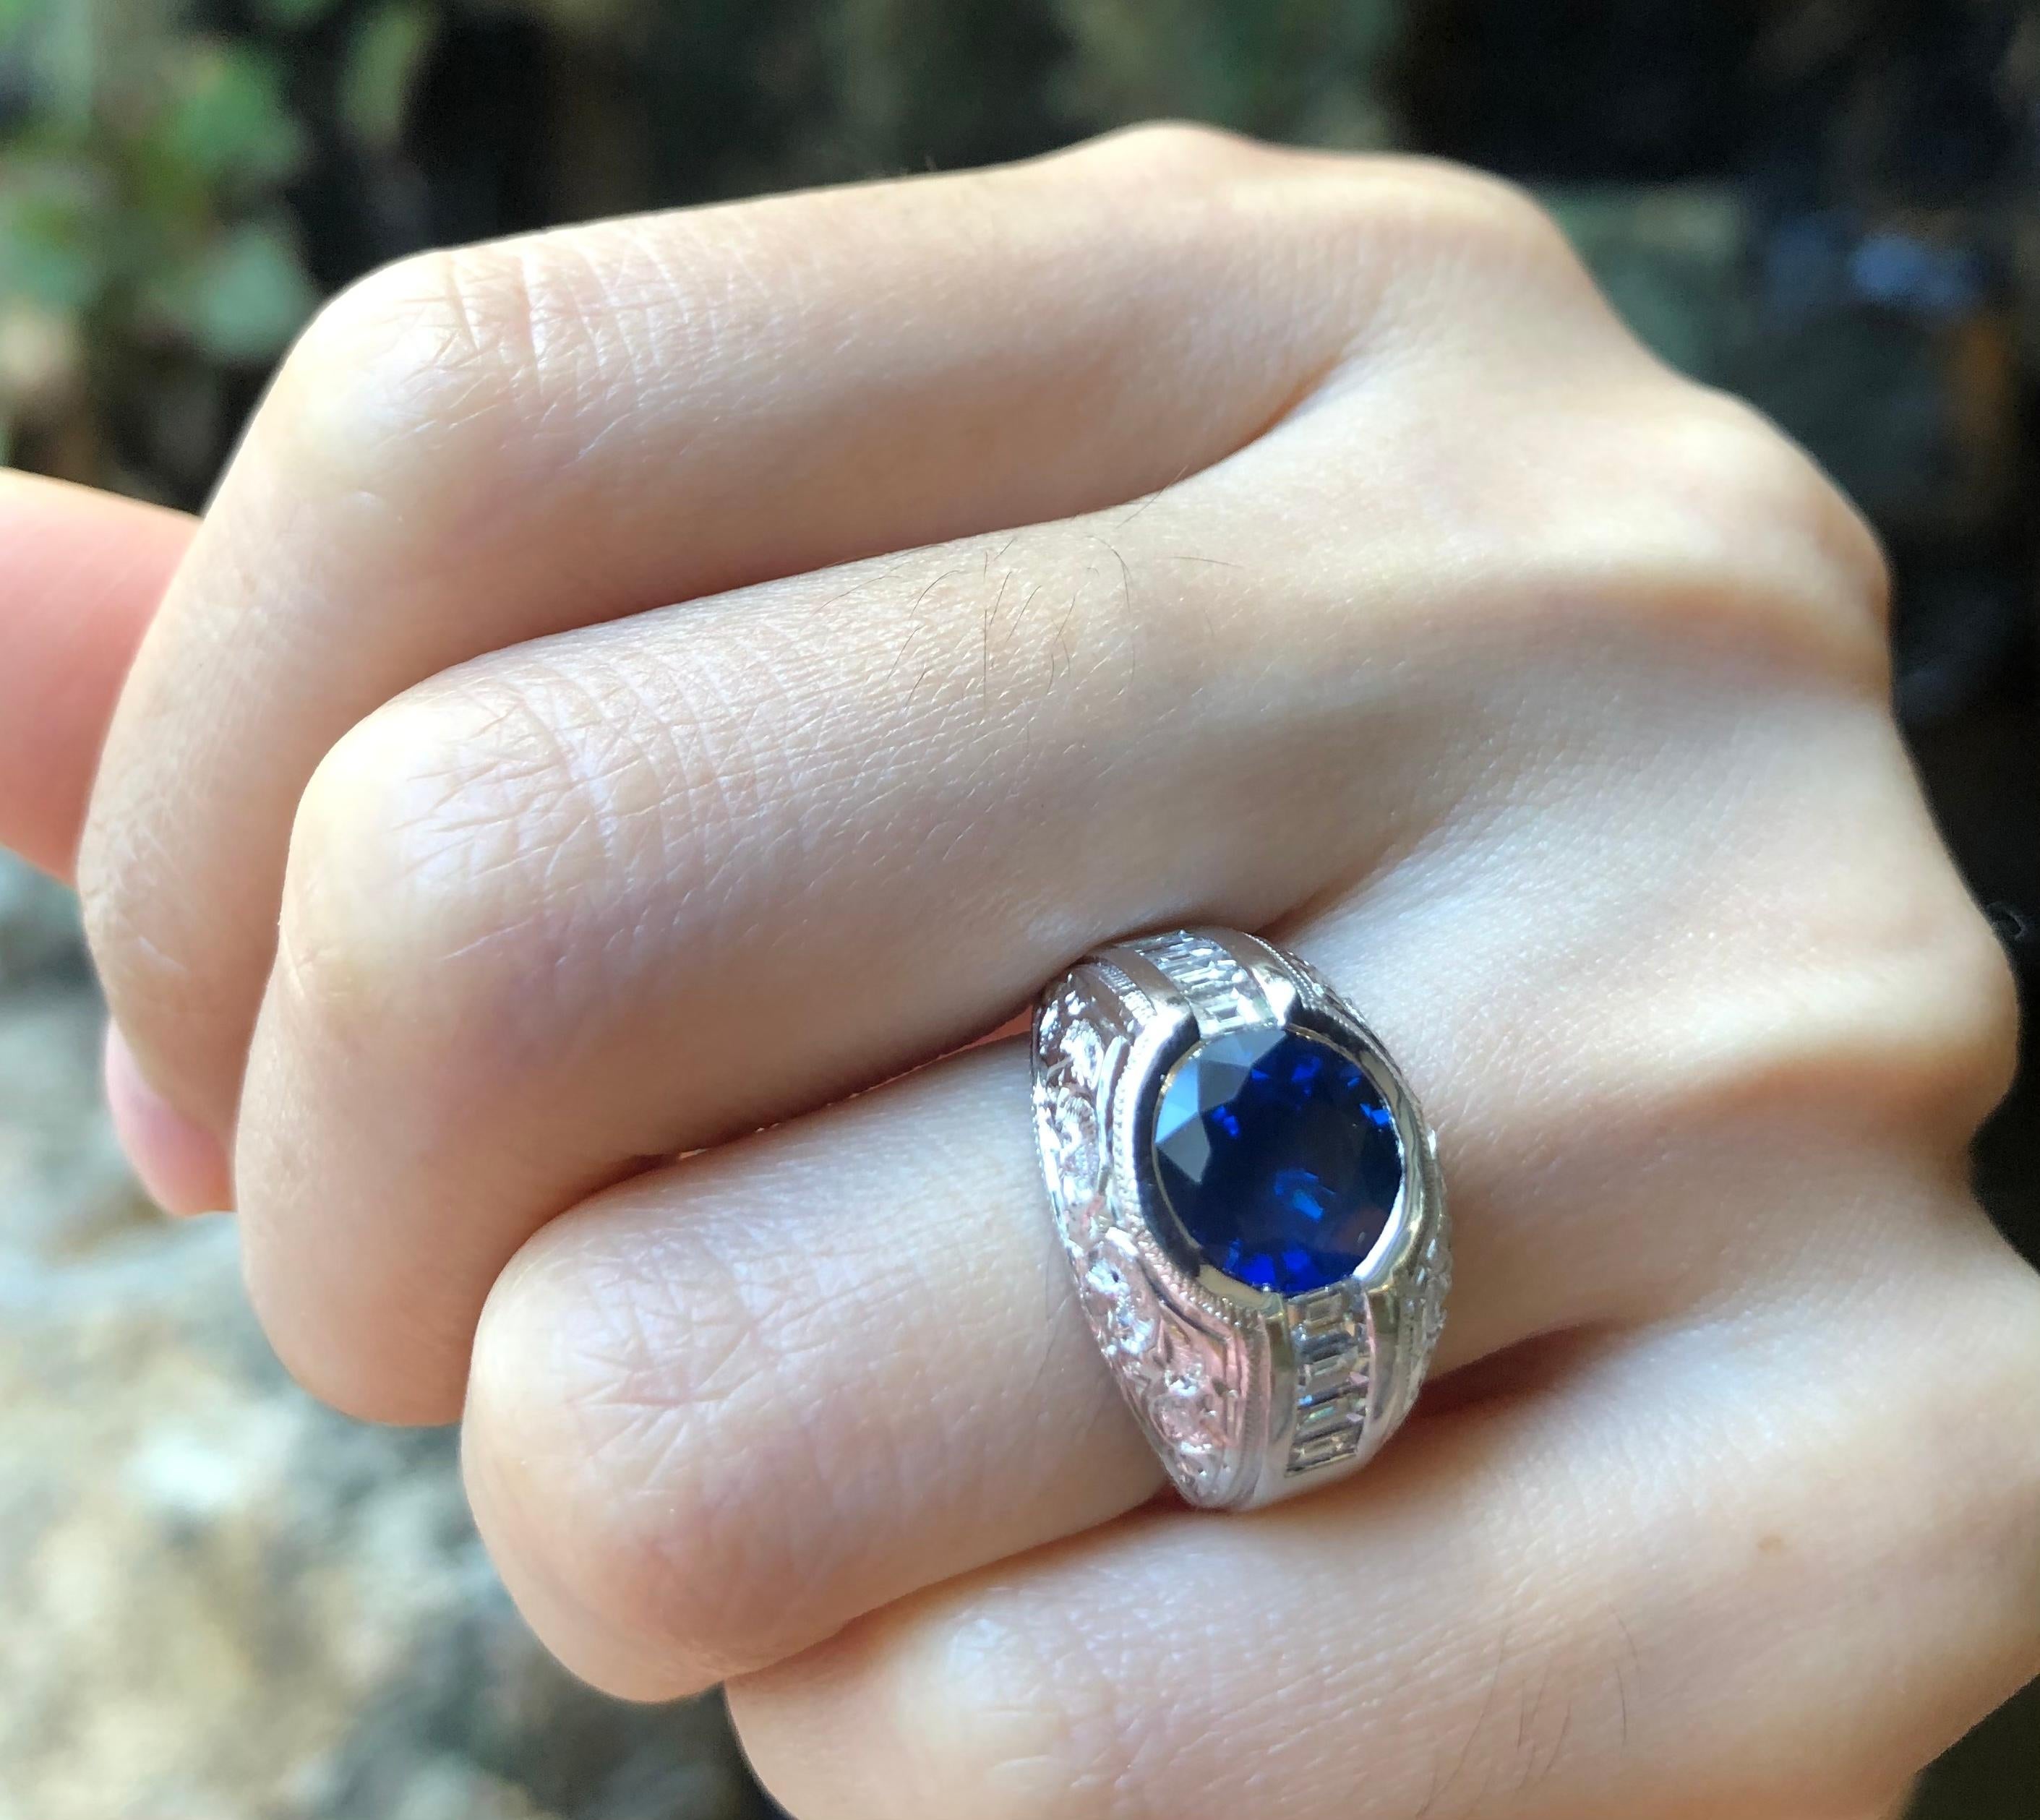 Round Cut Blue Sapphire, Diamond with Engraving Ring Set in Platinum 950 For Sale 1